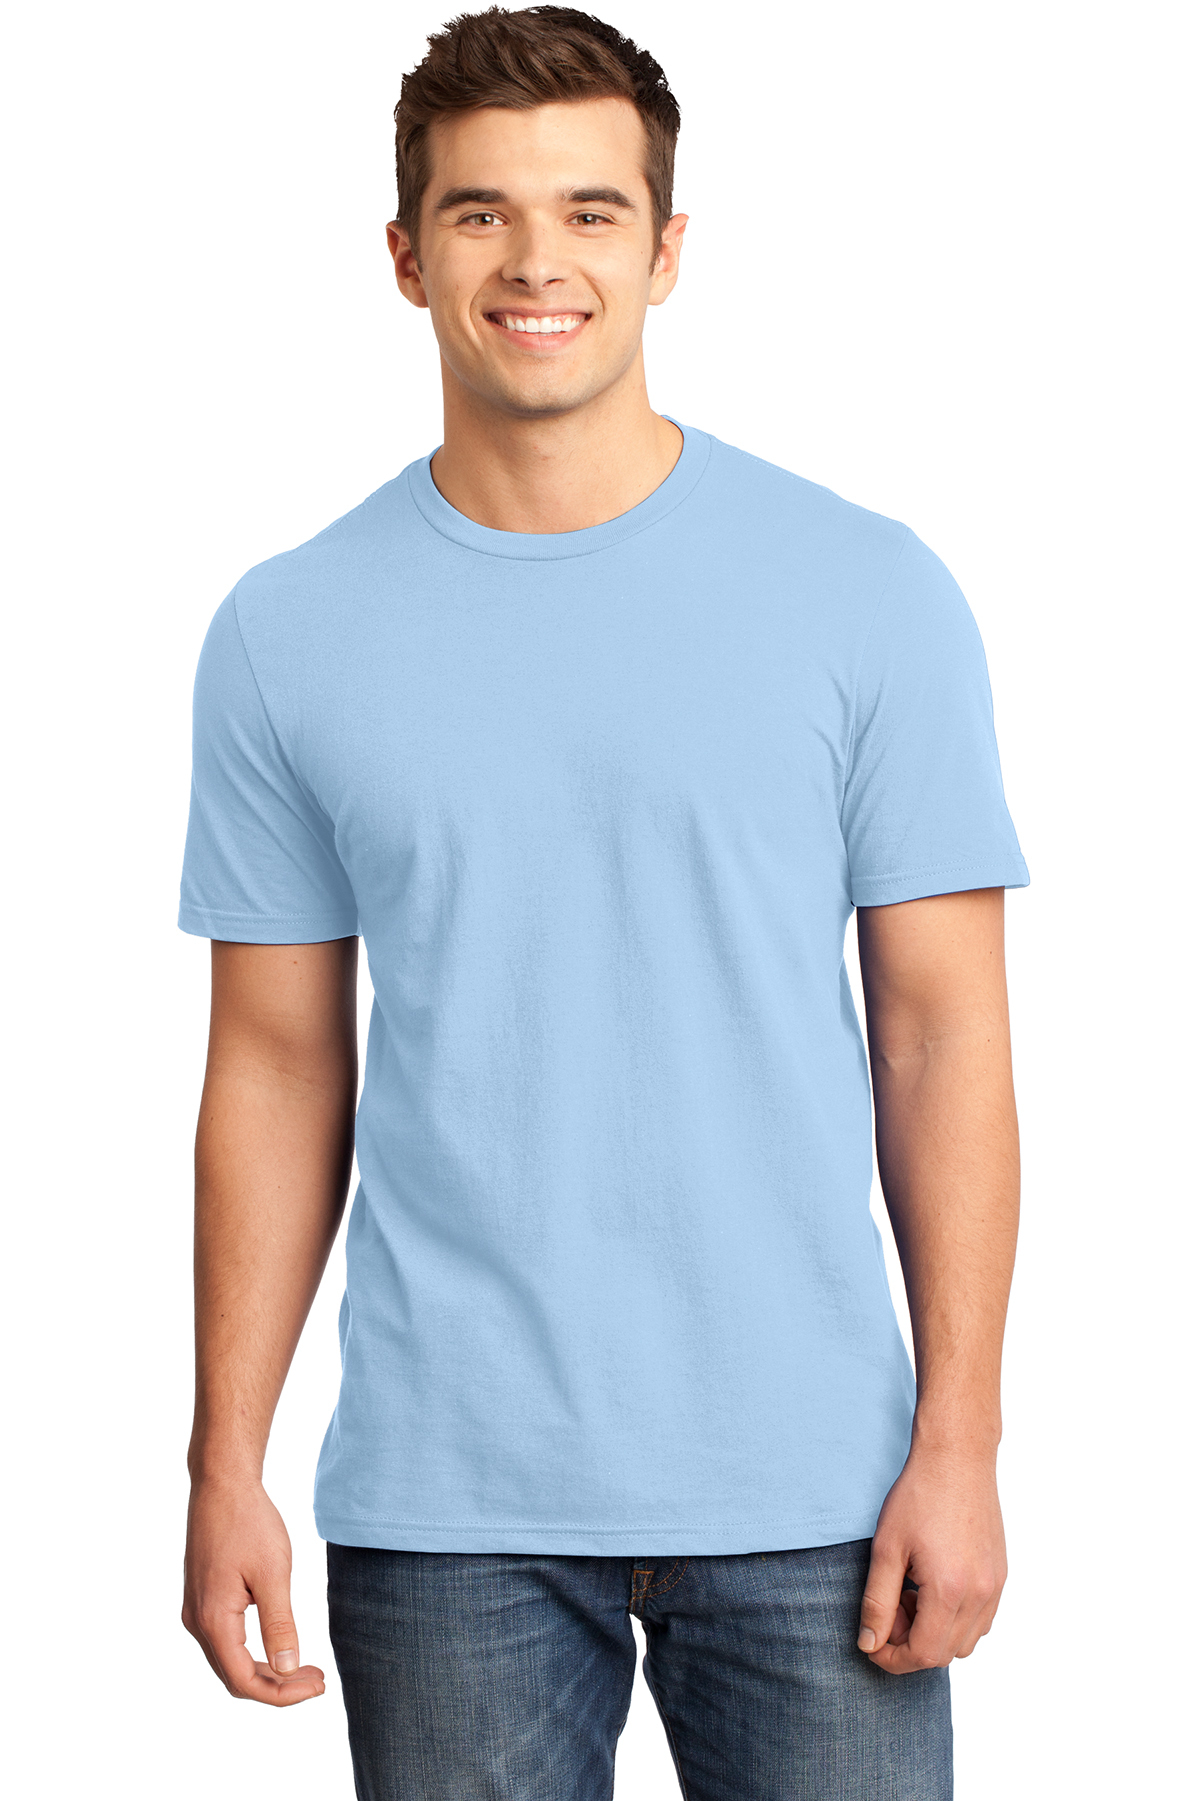 District DT6000 - Men's Very Important Tee - T-Shirts